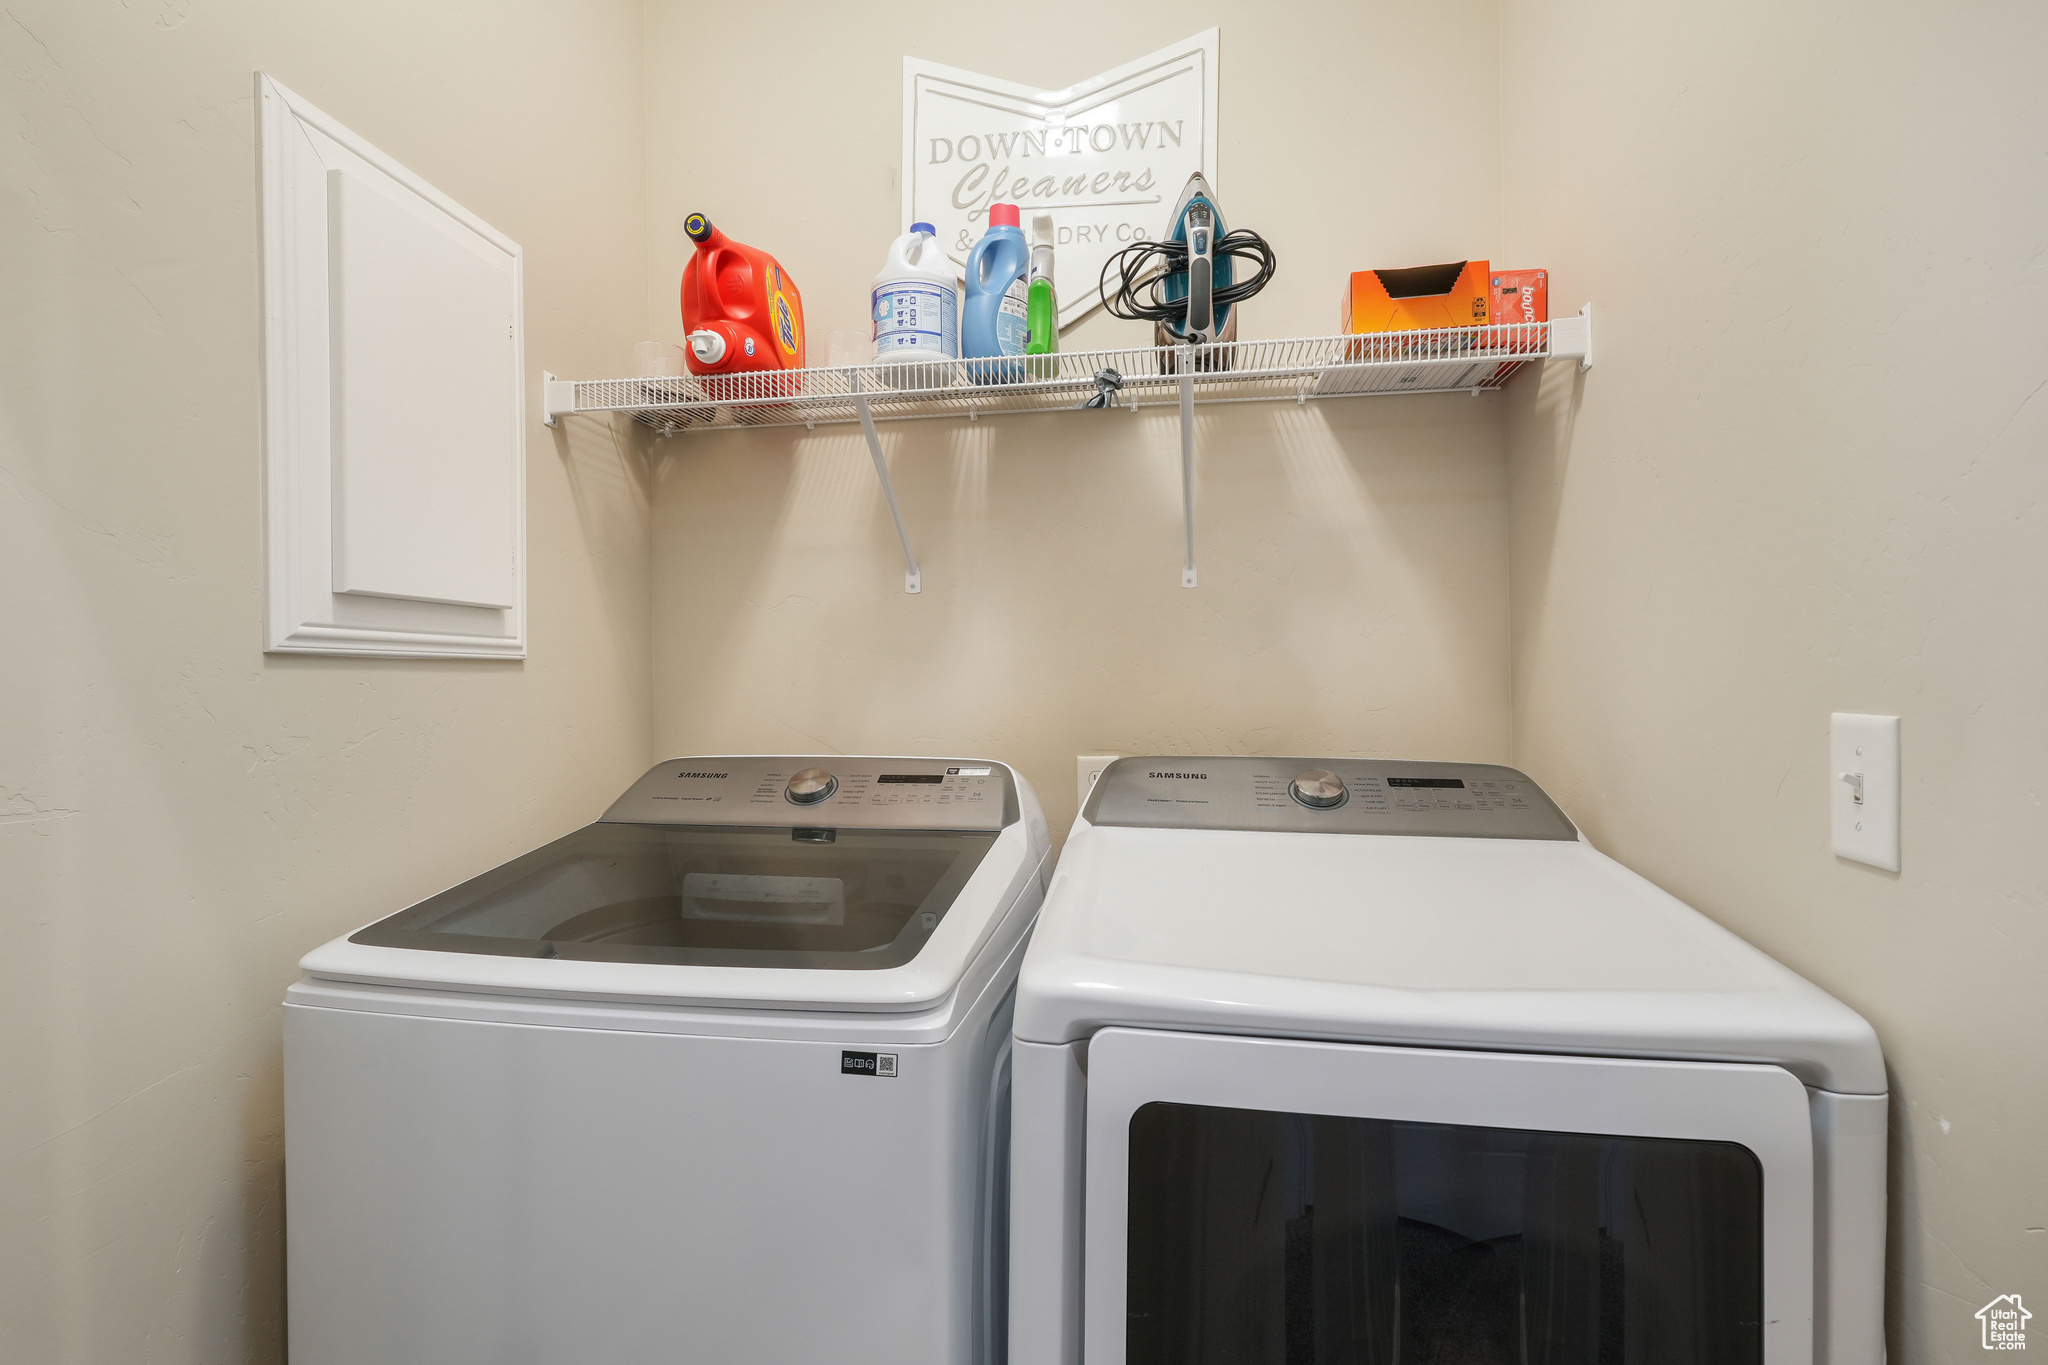 NEW washer/dryer (for sale)